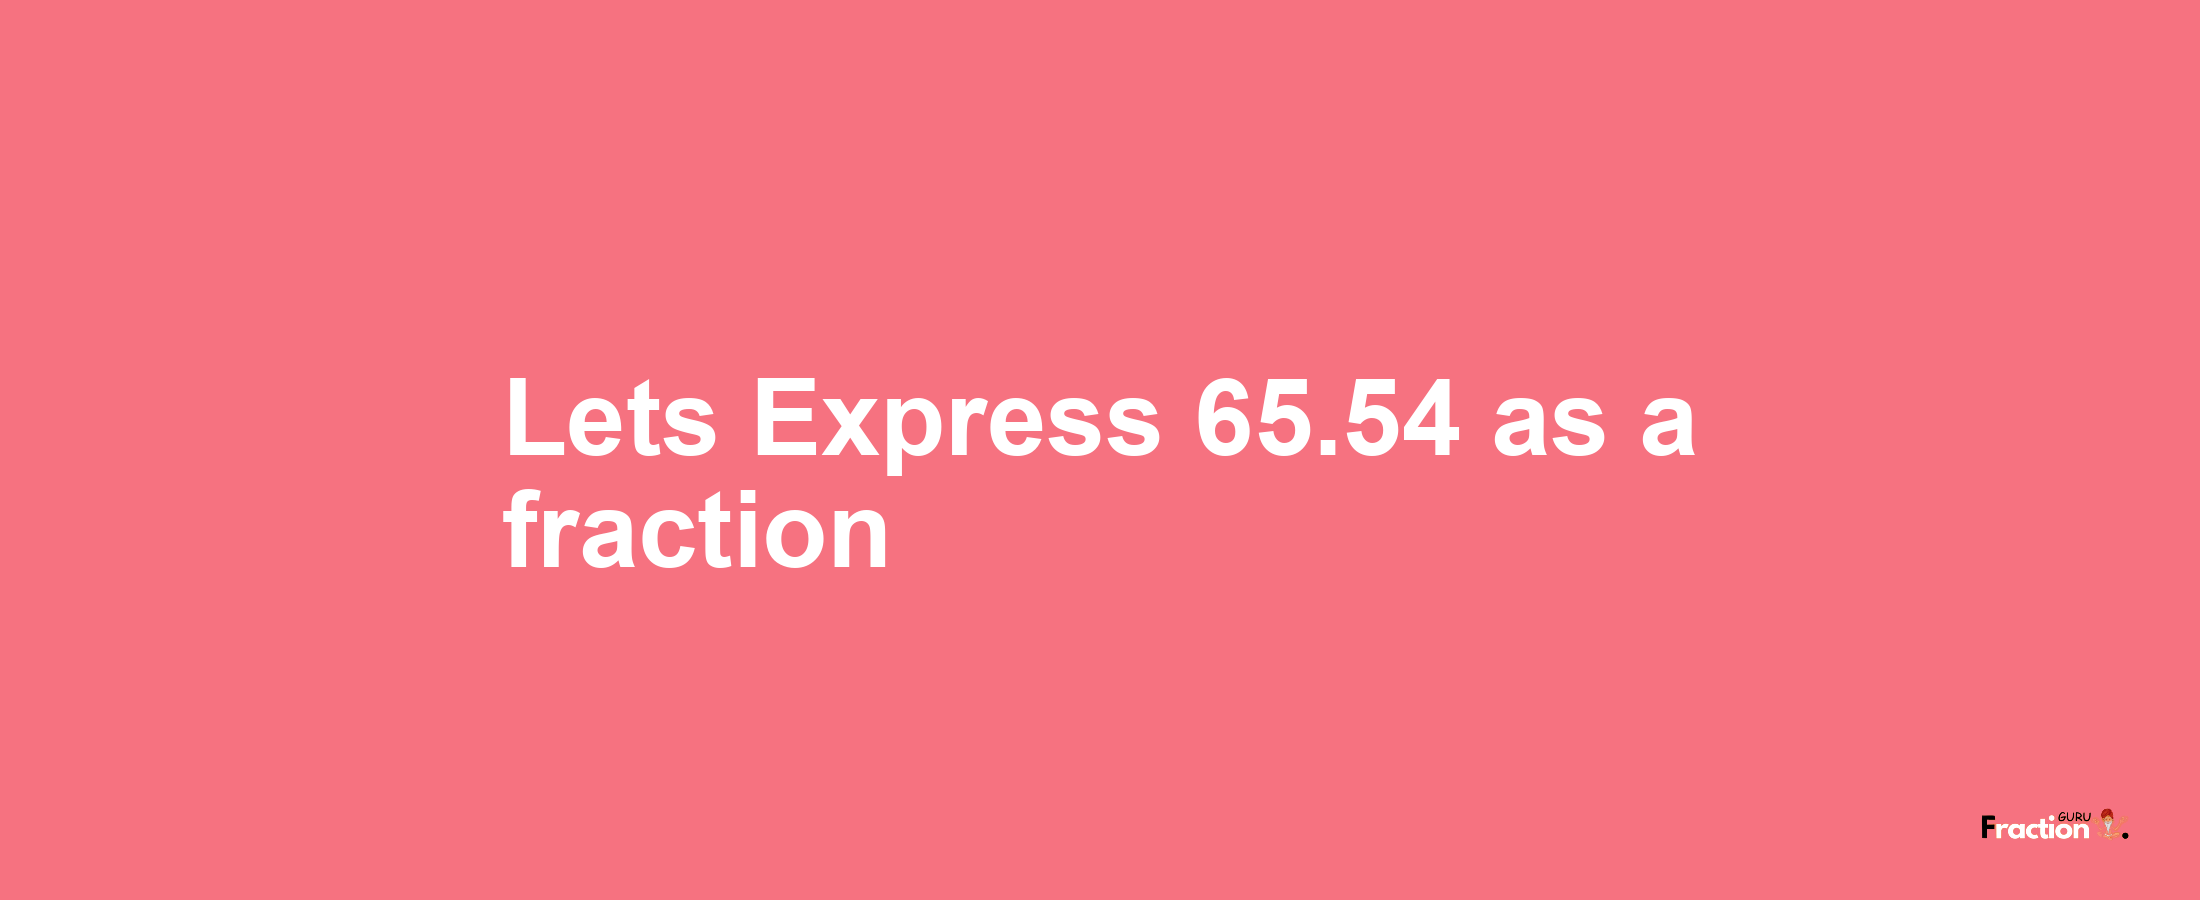 Lets Express 65.54 as afraction